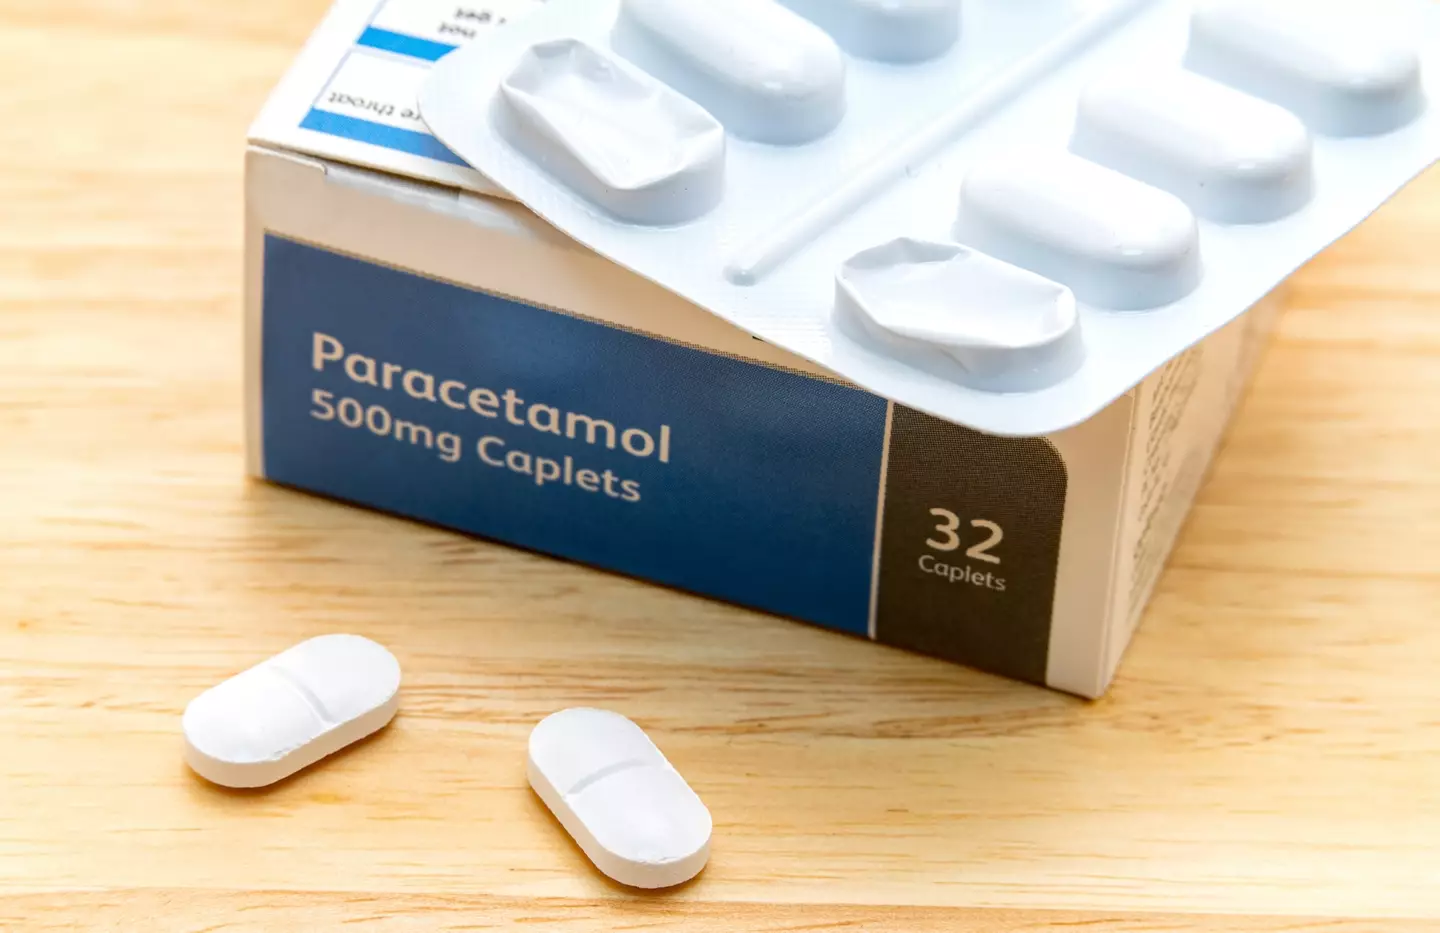 Taking paracetamol regularly over prolonged periods could wreak havoc on your health, a GP warned.